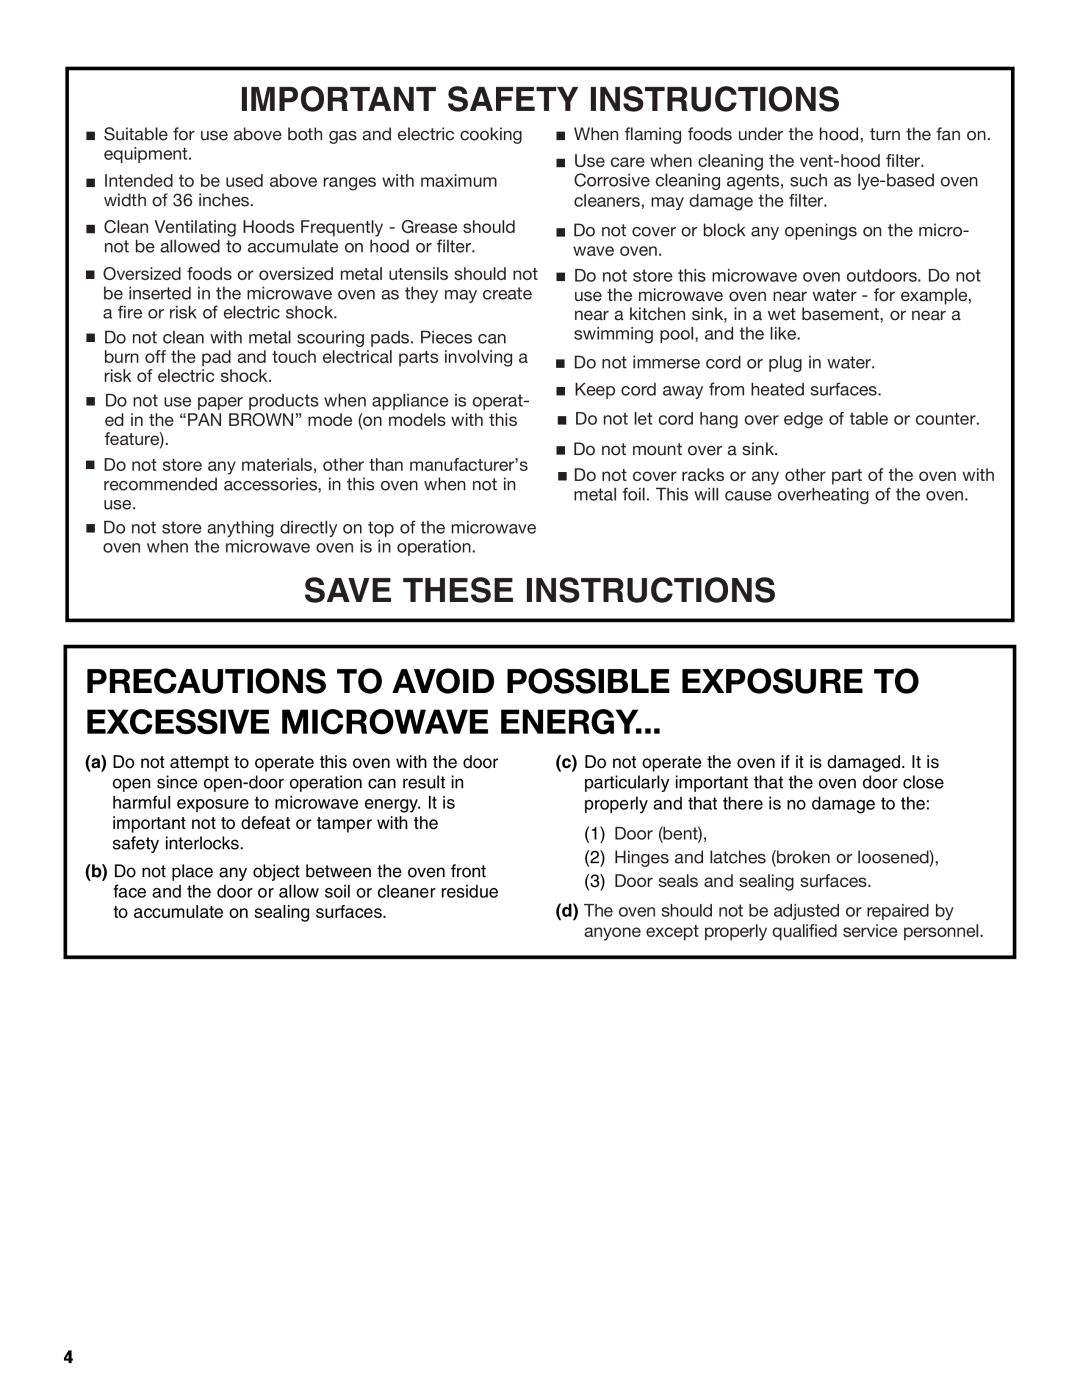 Whirlpool TMH14XL manual Important Safety Instructions, Save These Instructions 